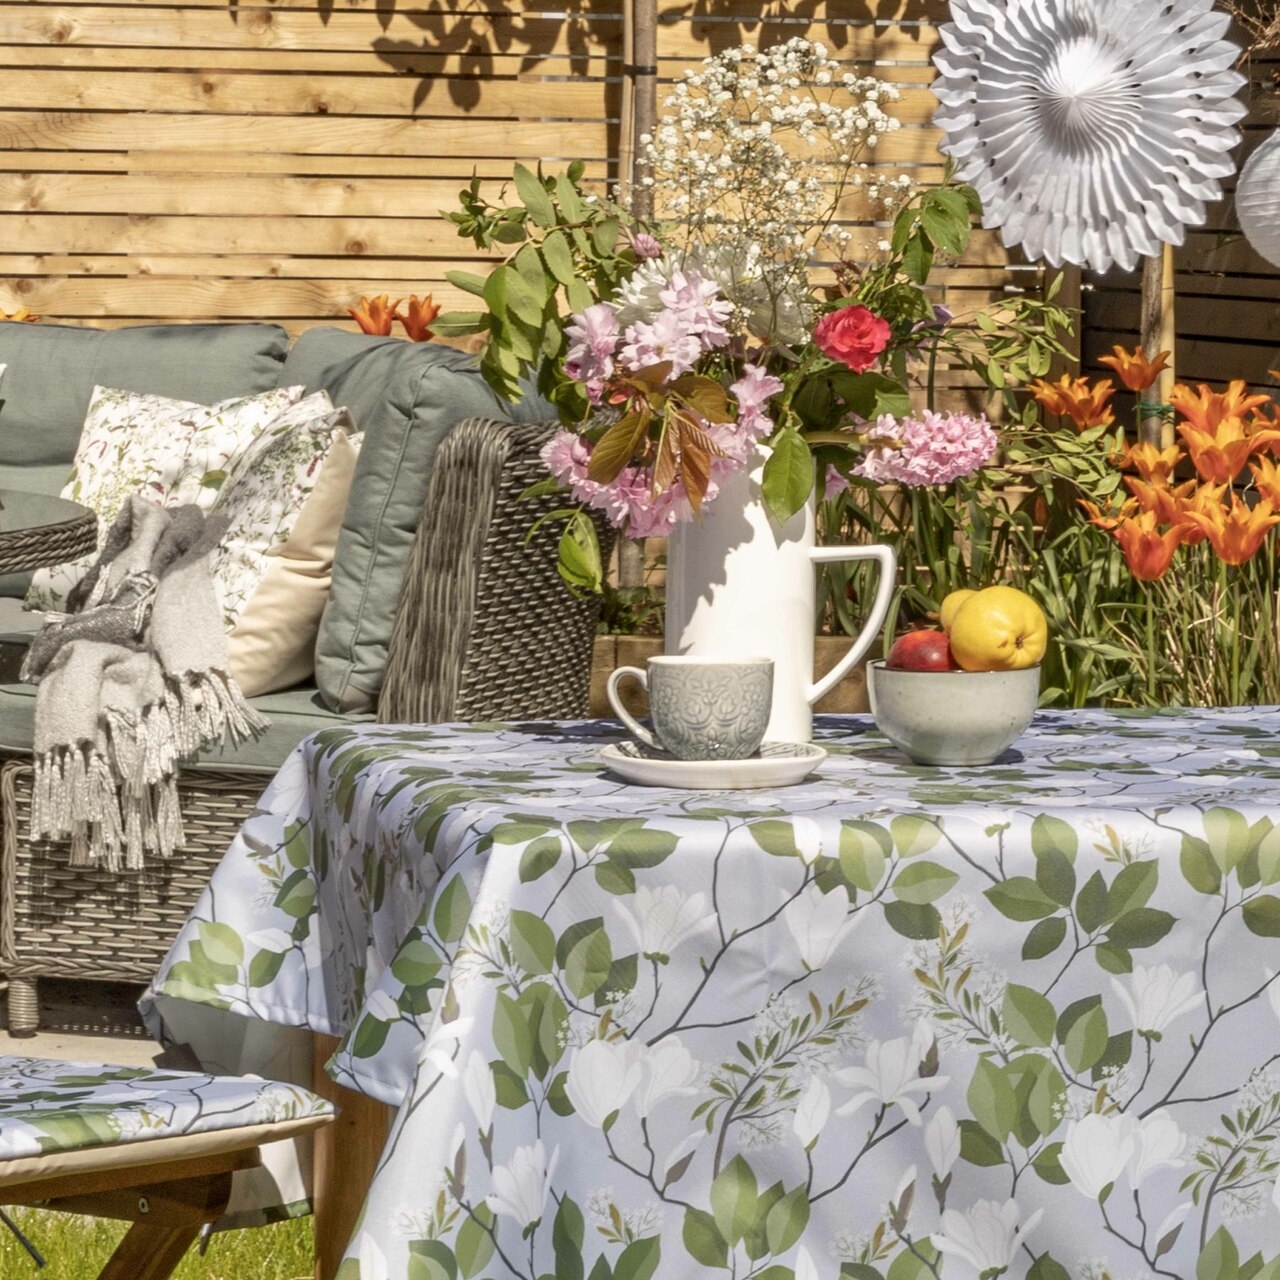 Celina Digby Luxury Outdoor Garden Tablecloth AVAILABLE IN 5 SIZES – Optional Centre Hole for Parasol Magnolia Grey XL (250cm x 140cm)